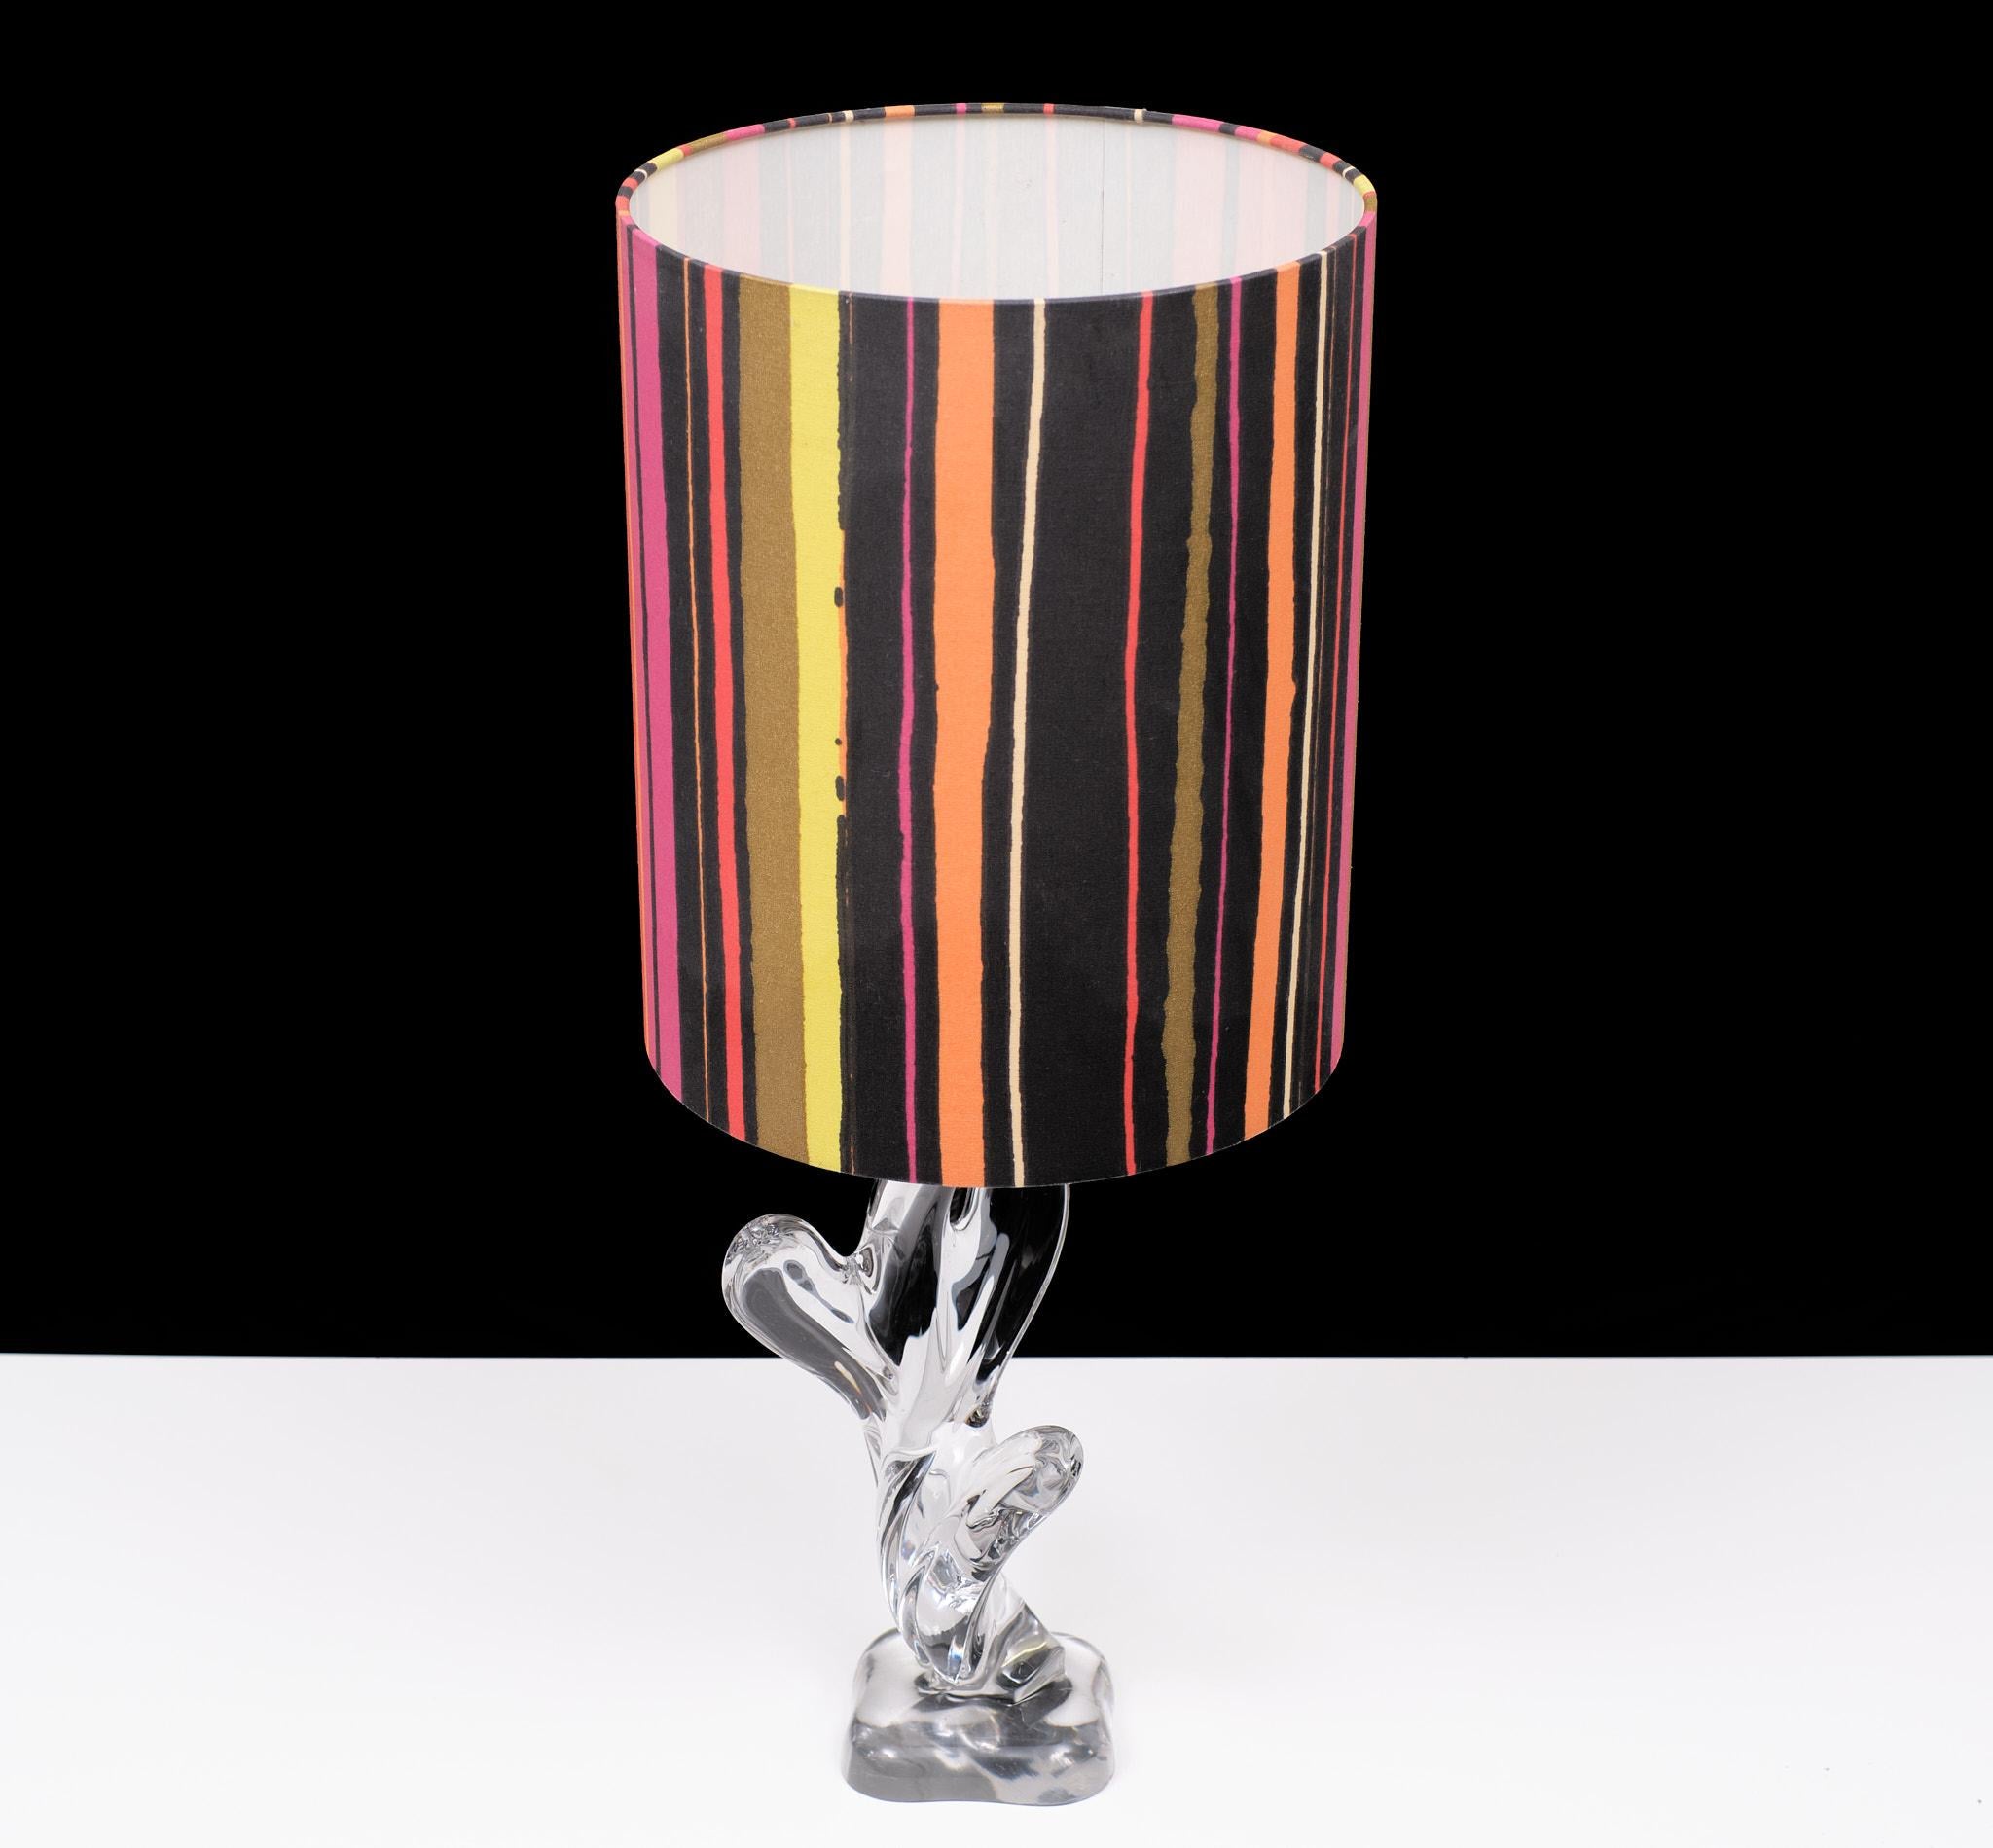 Crystal Chrystal Glass Cactus Table Lamp Vannes the Chatel, France, 1960s For Sale